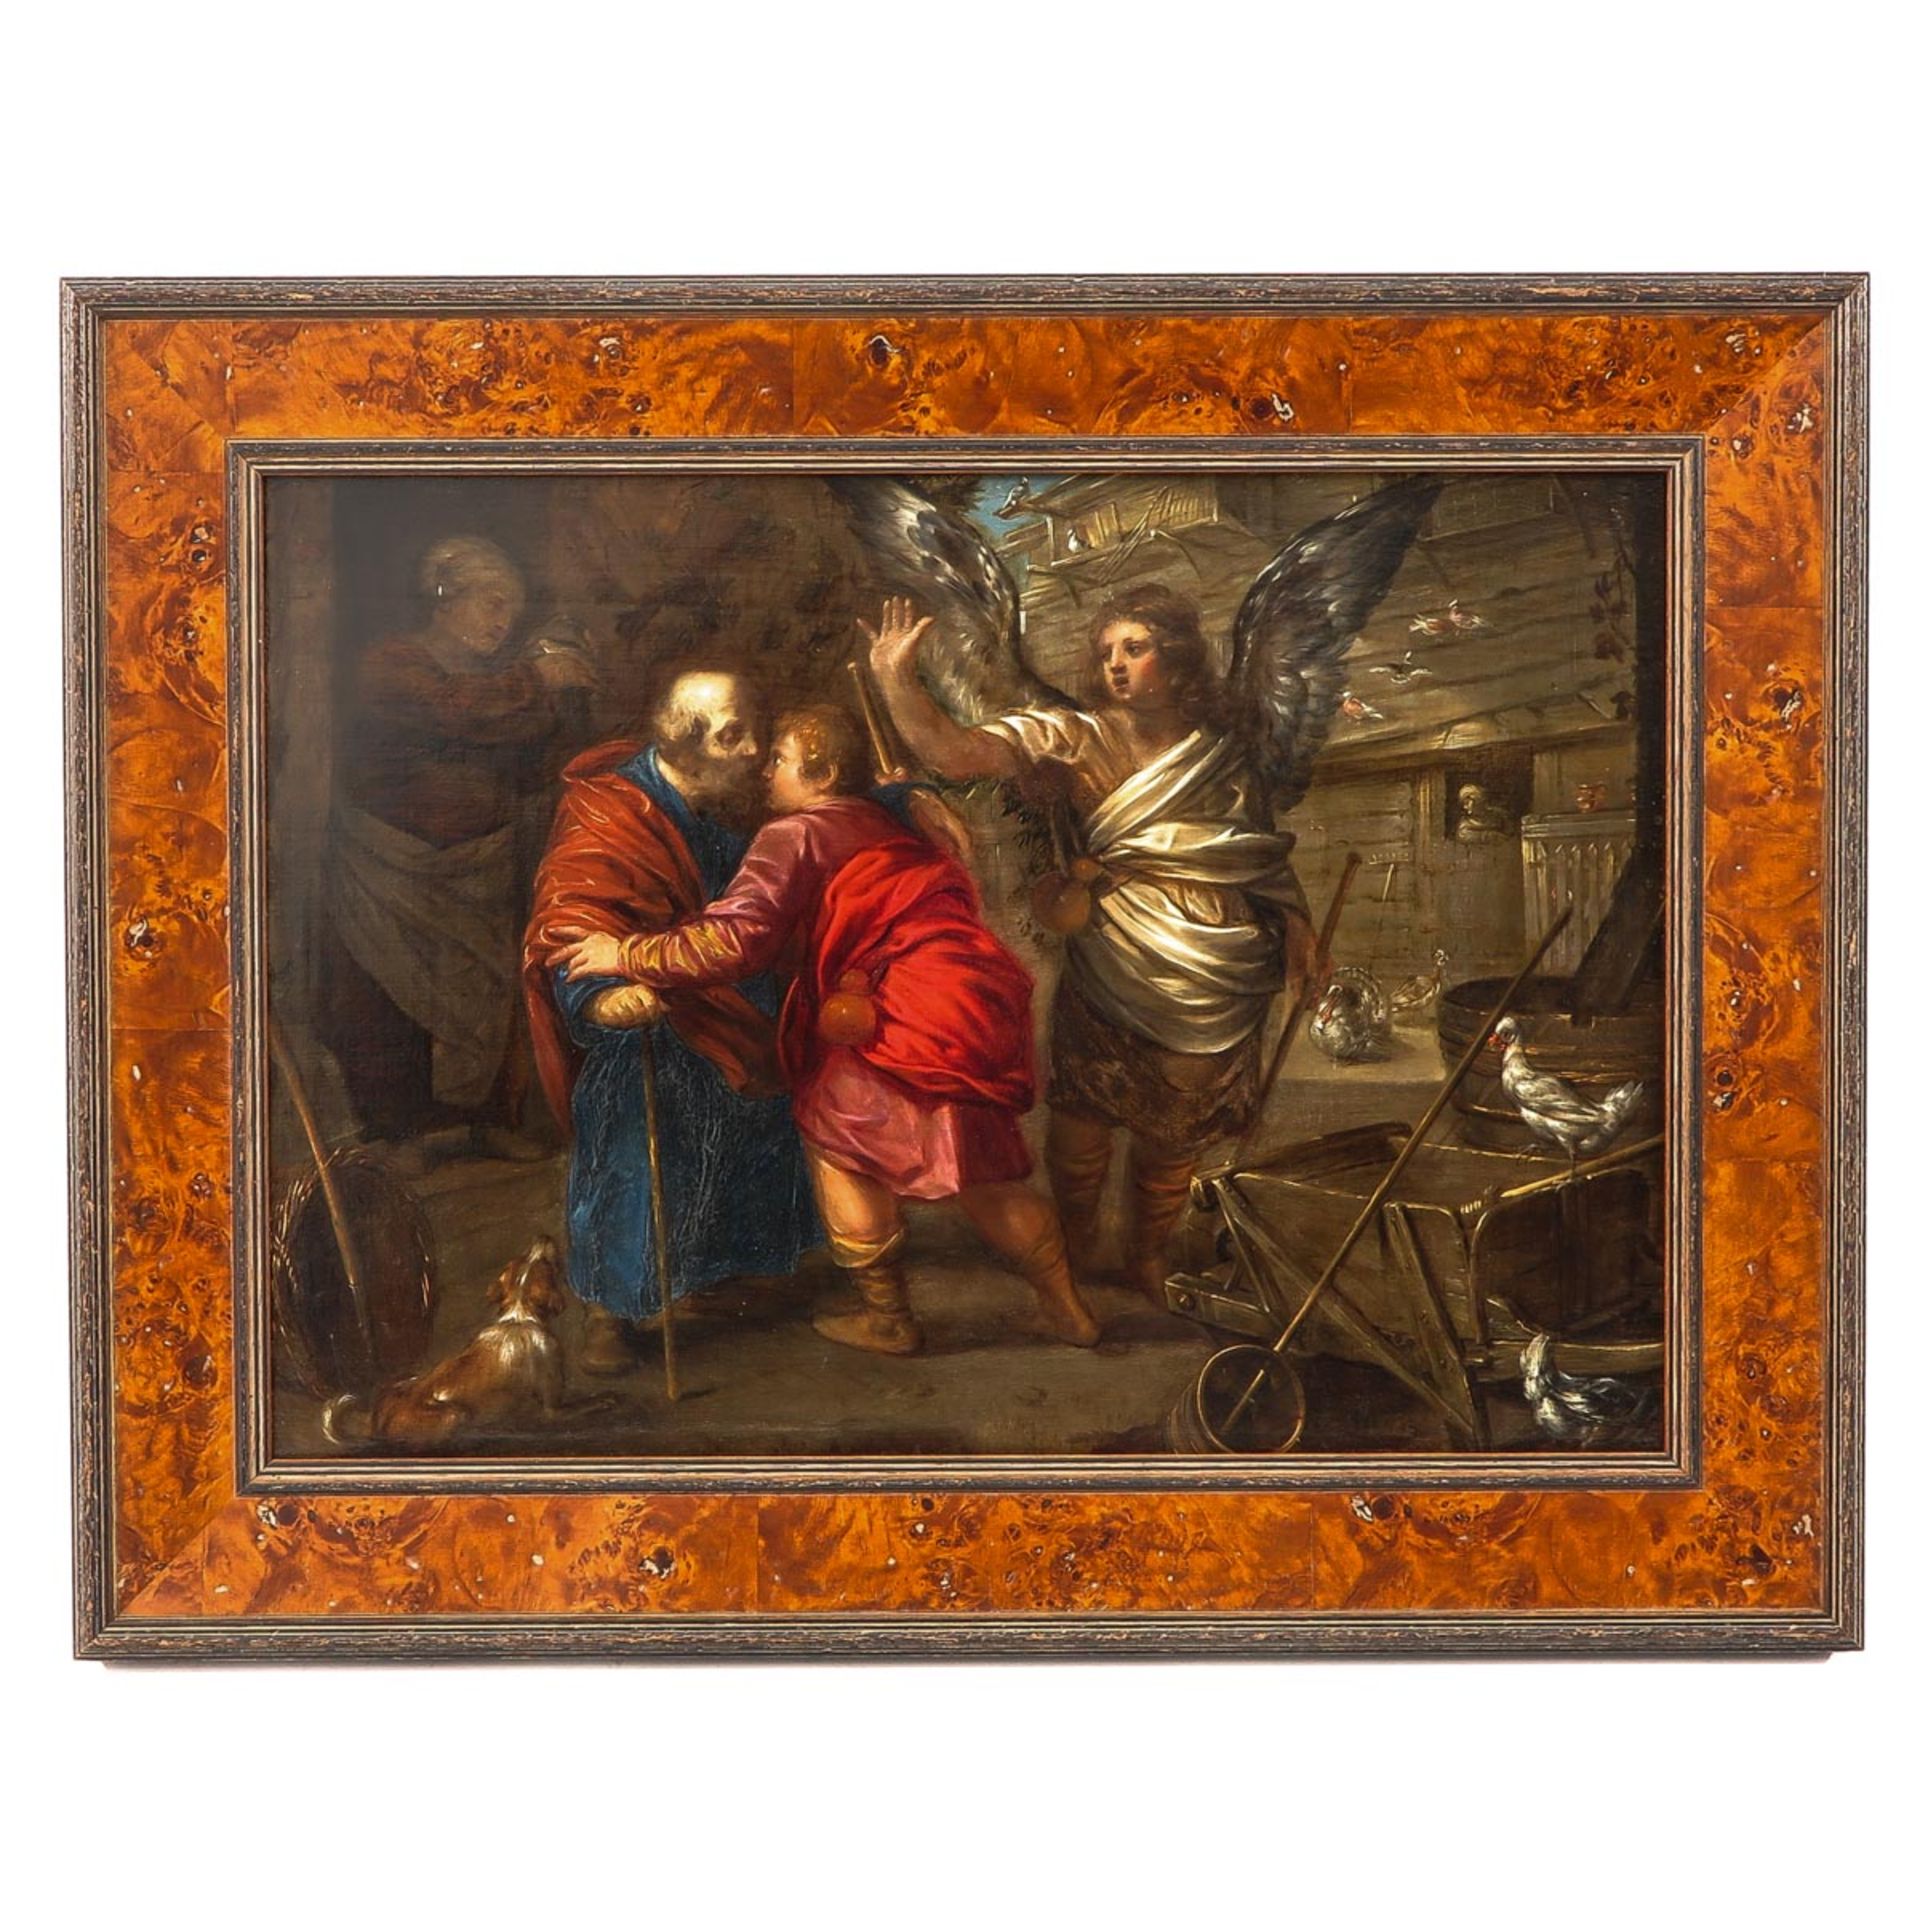 A 17th - 18th Century Oil on Panel